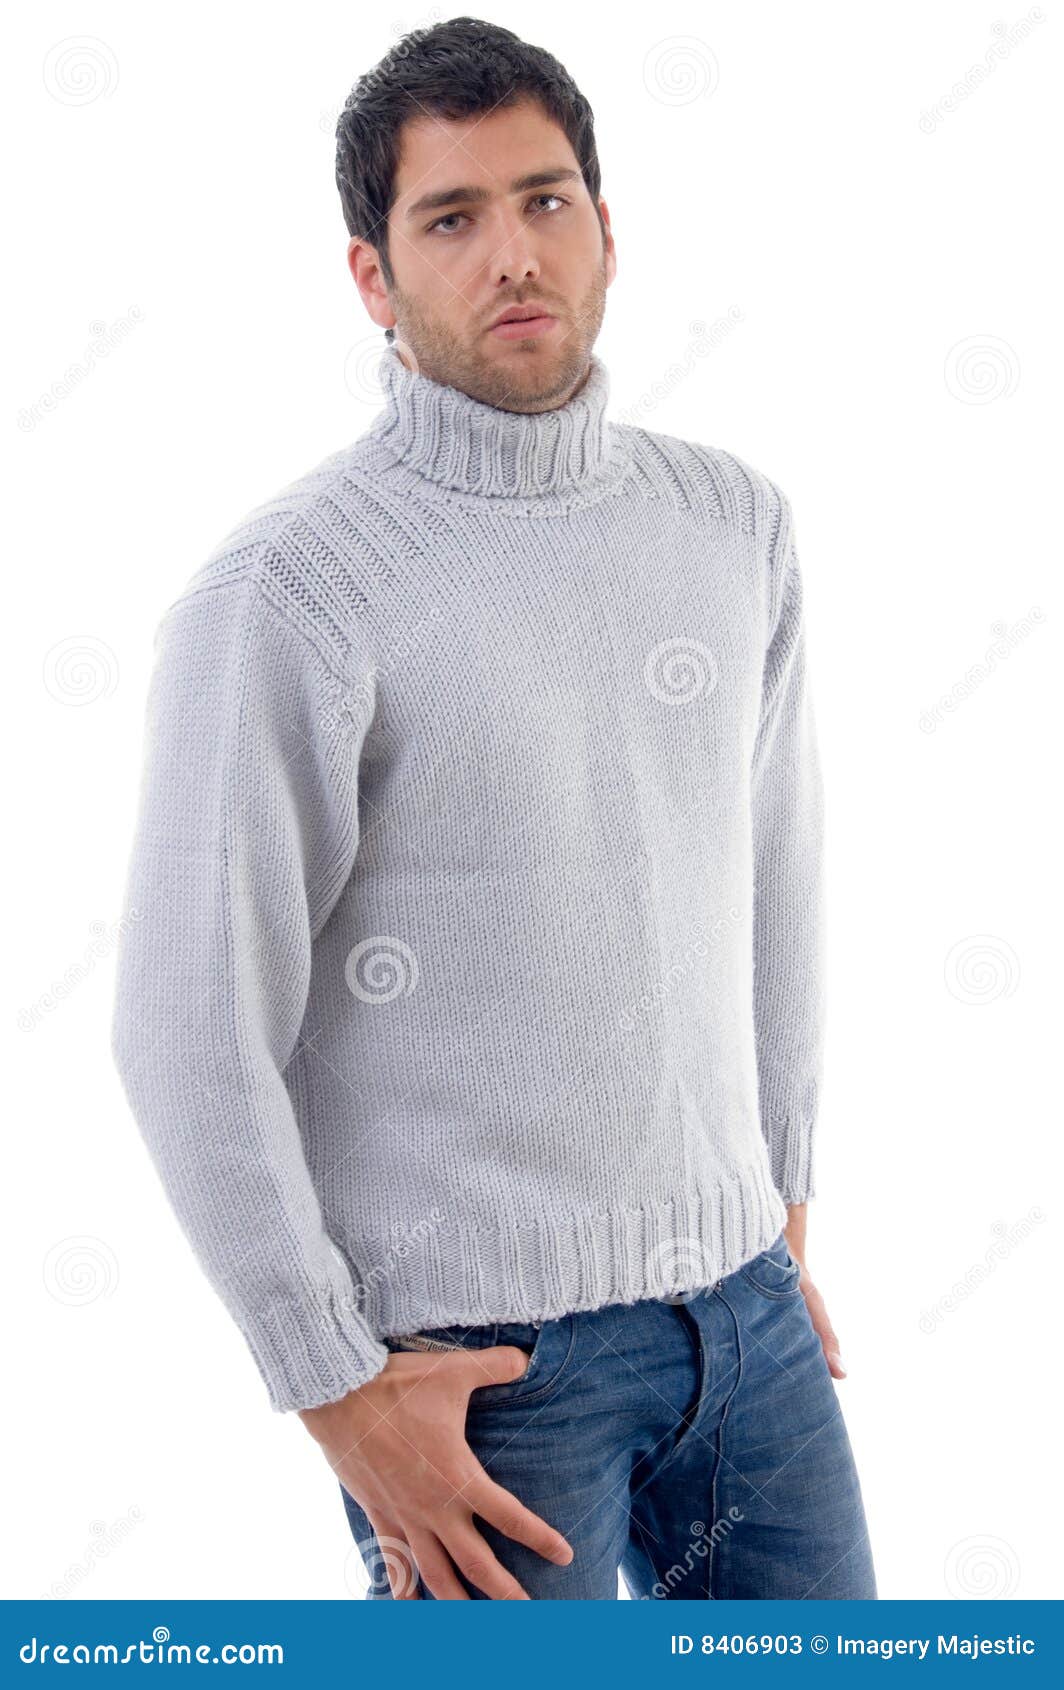 Young Handsome Guy Wearing Winter Clothes Stock Photos - Image: 8406903